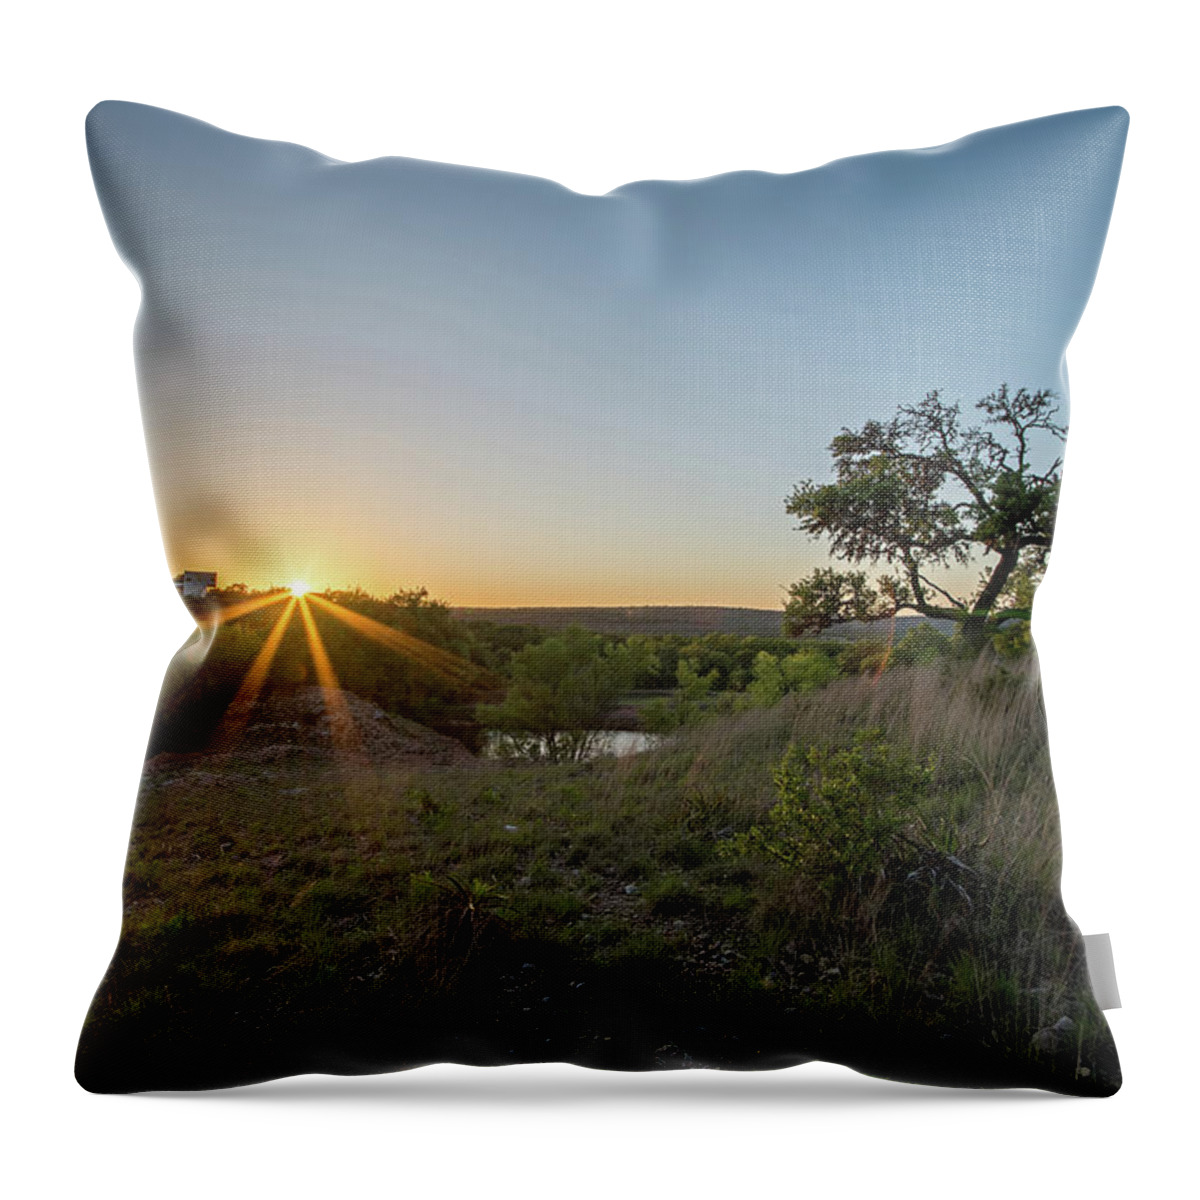 Park Throw Pillow featuring the photograph Landscapes Around Willow City Loop Texas At Sunset #5 by Alex Grichenko